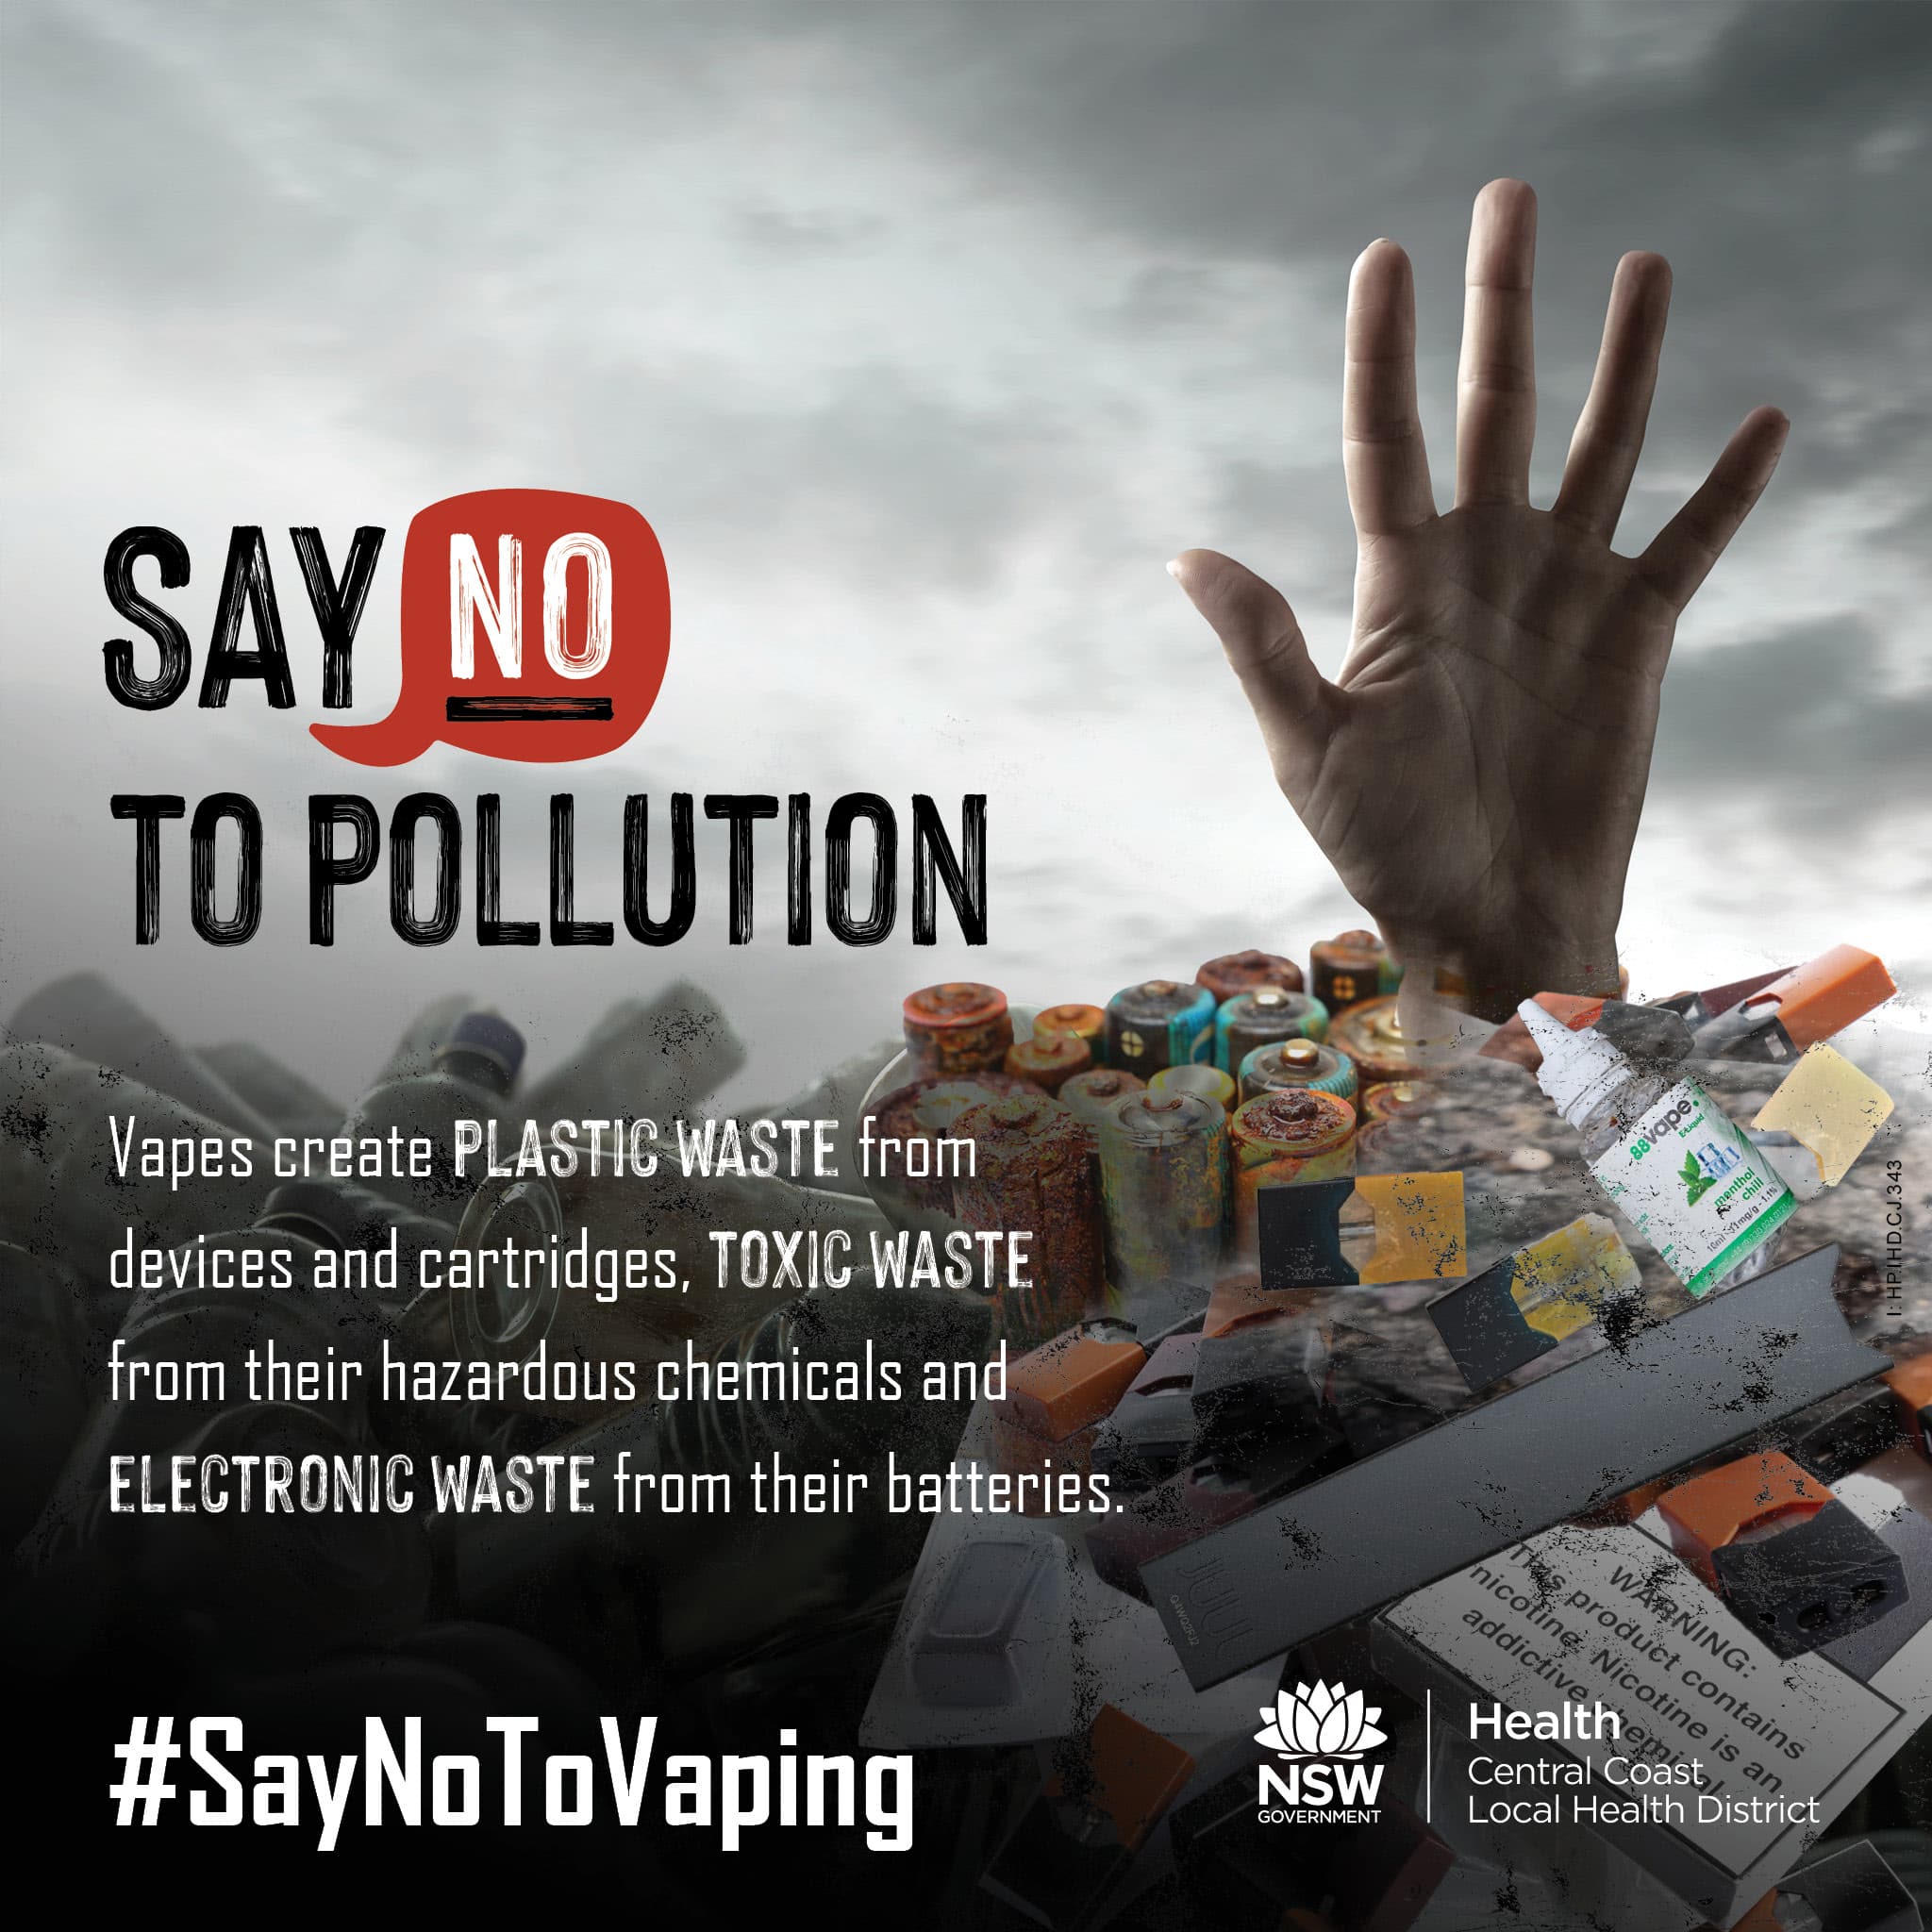 The Say No to Pollution social media tile preview image featuring a pile of waste with a hand reaching out.